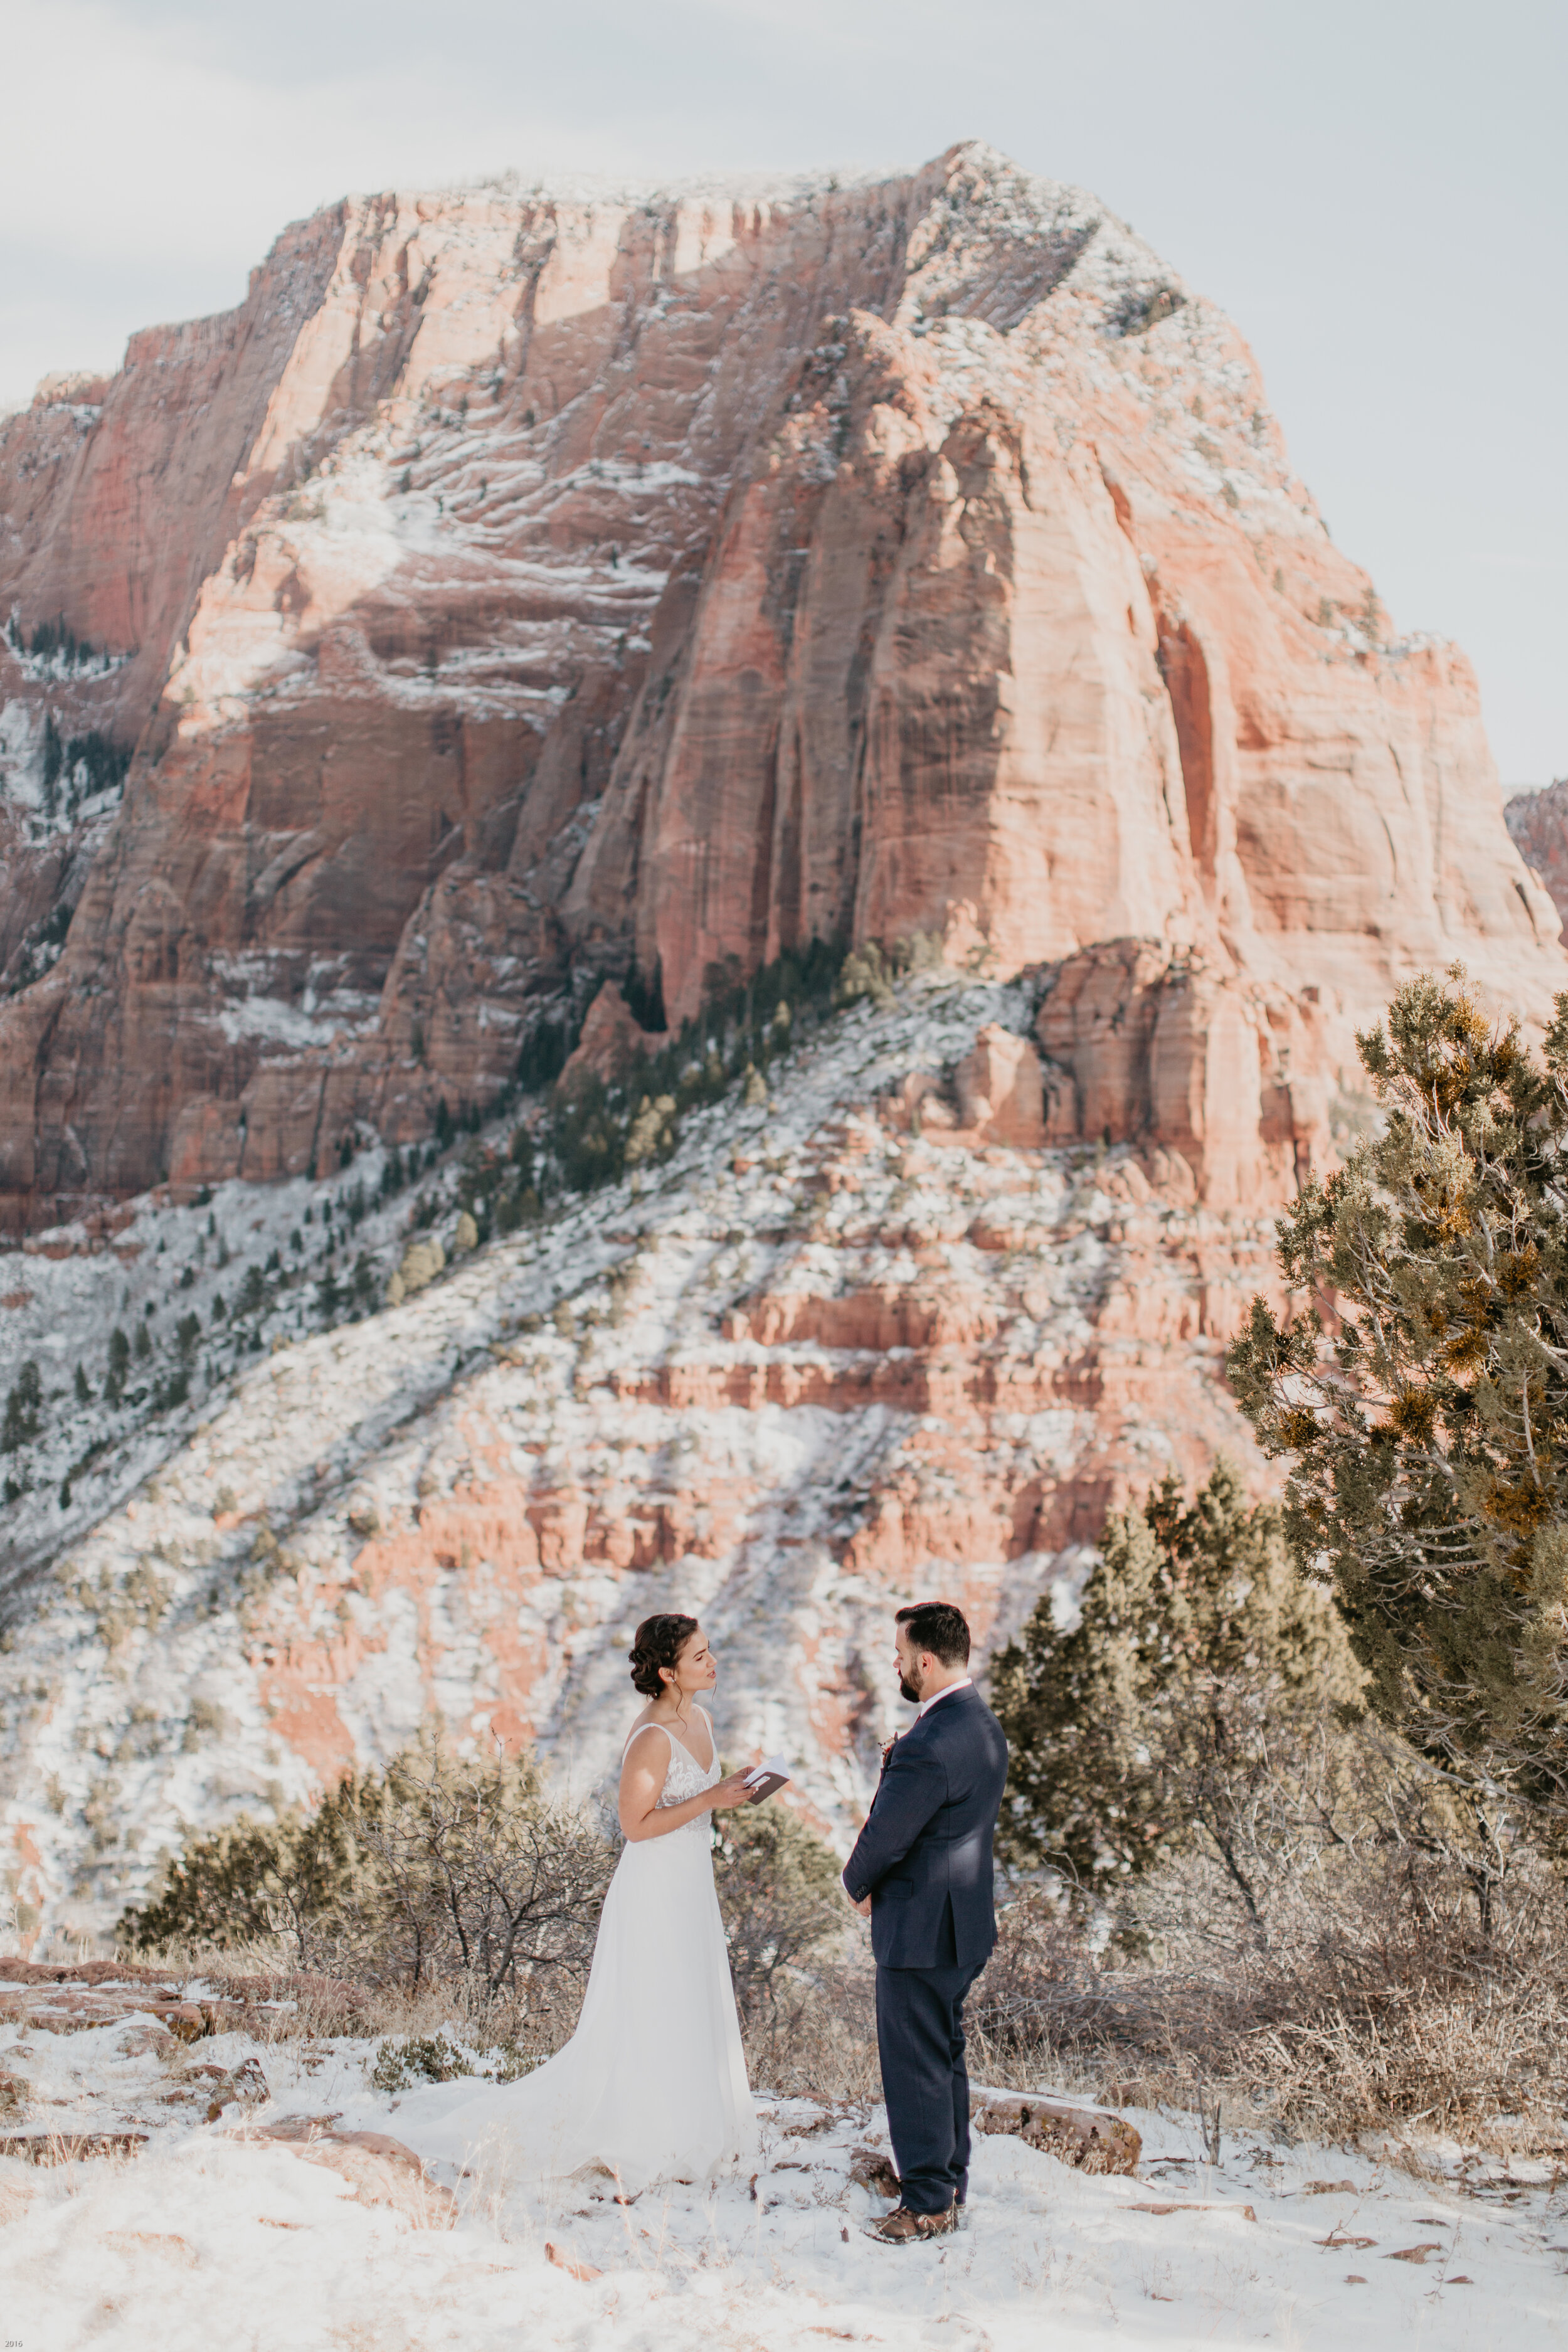 Nicole-Daacke-Photography-snowy-hiking-elopement-in-zion-national-park-zion-elopement-photographer-canyon-overlook-trial-brial-portraits-in-mt-zion-national-park-utah-desert-adventure-elopement-photographer-125.jpg